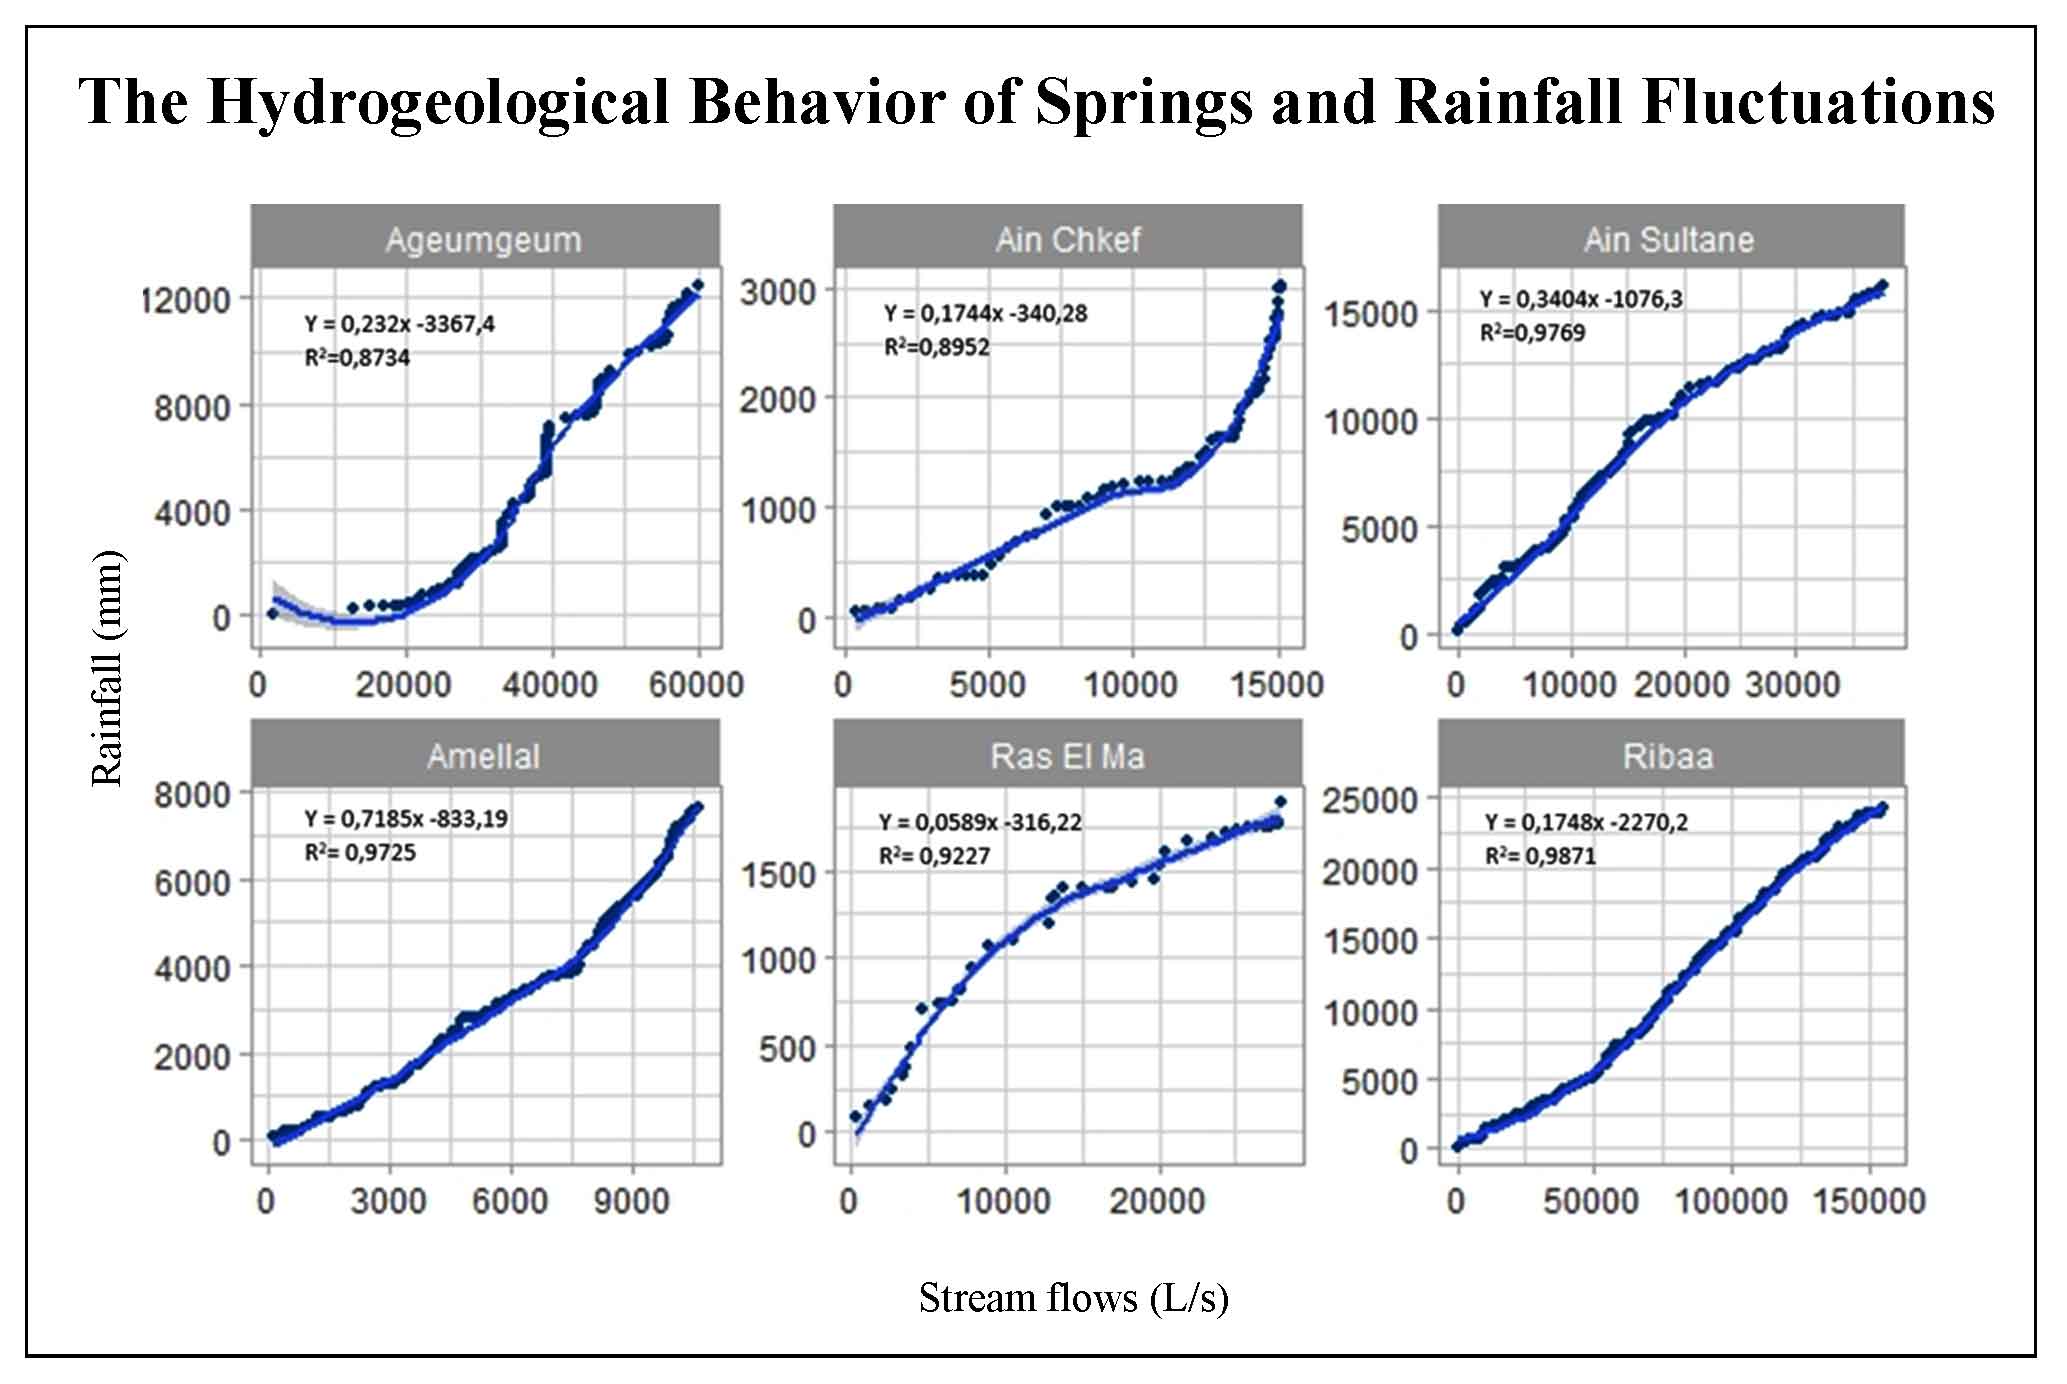 The Hydrogeological Behavior of Springs in Face of Rainfall Fluctuations in the Plain of Fez and its Middle Atlas Border, Morocco